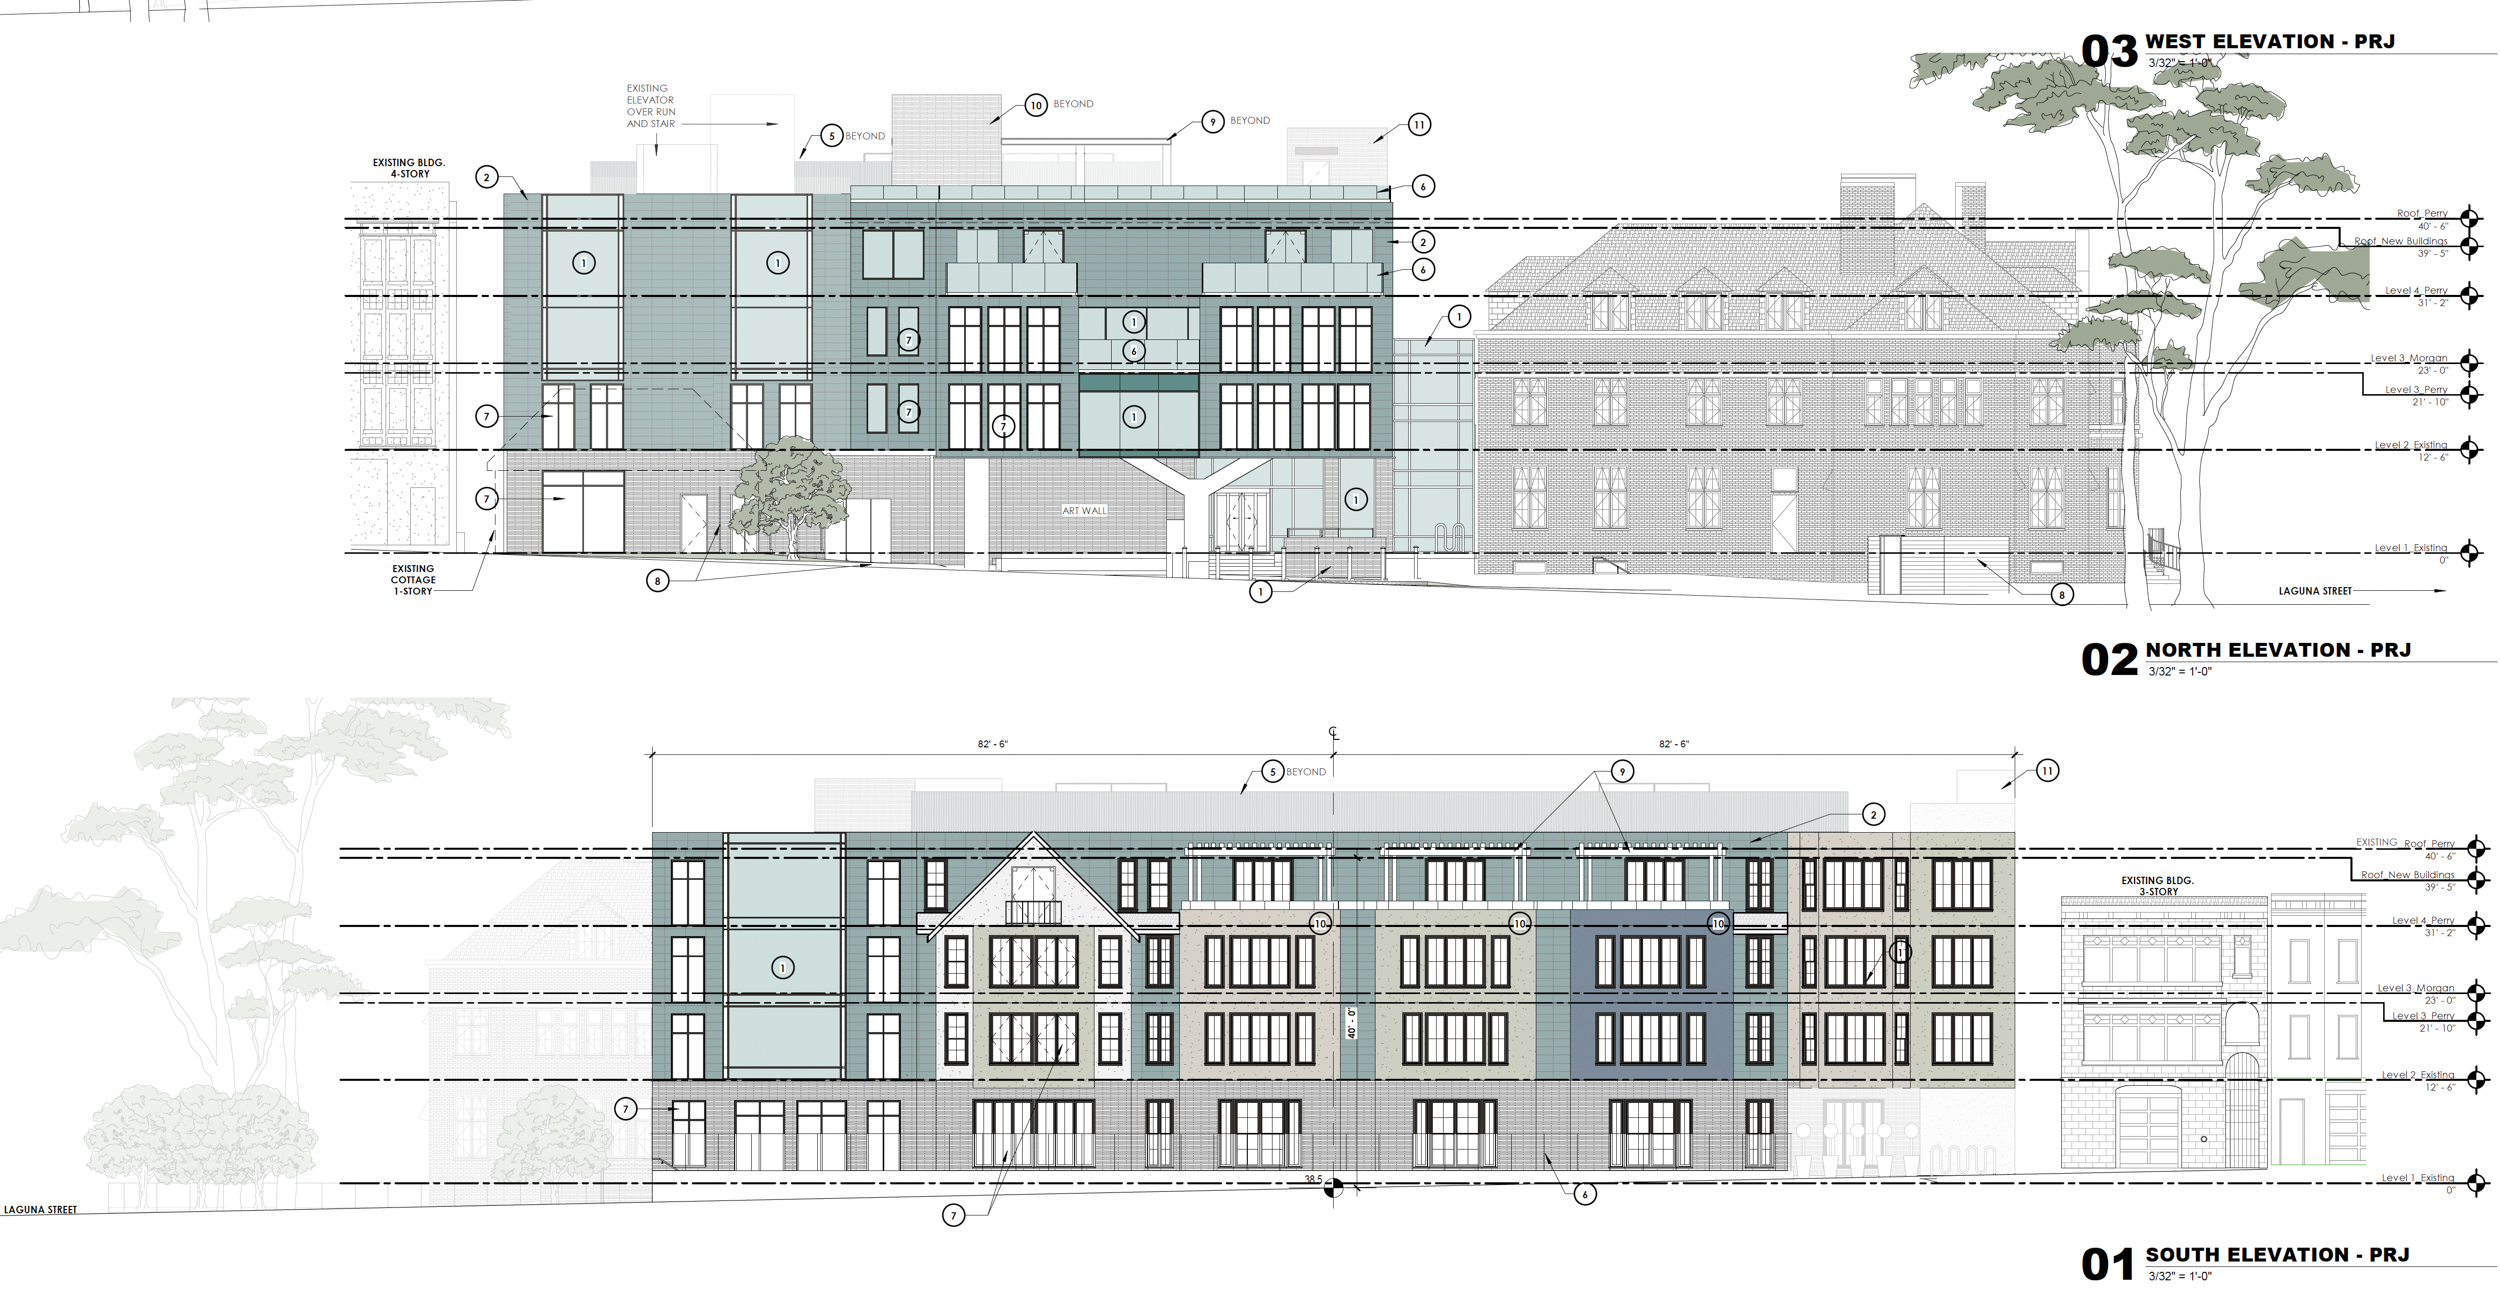 Heritage on the Marina facade elevations, illustration by HKS Architects